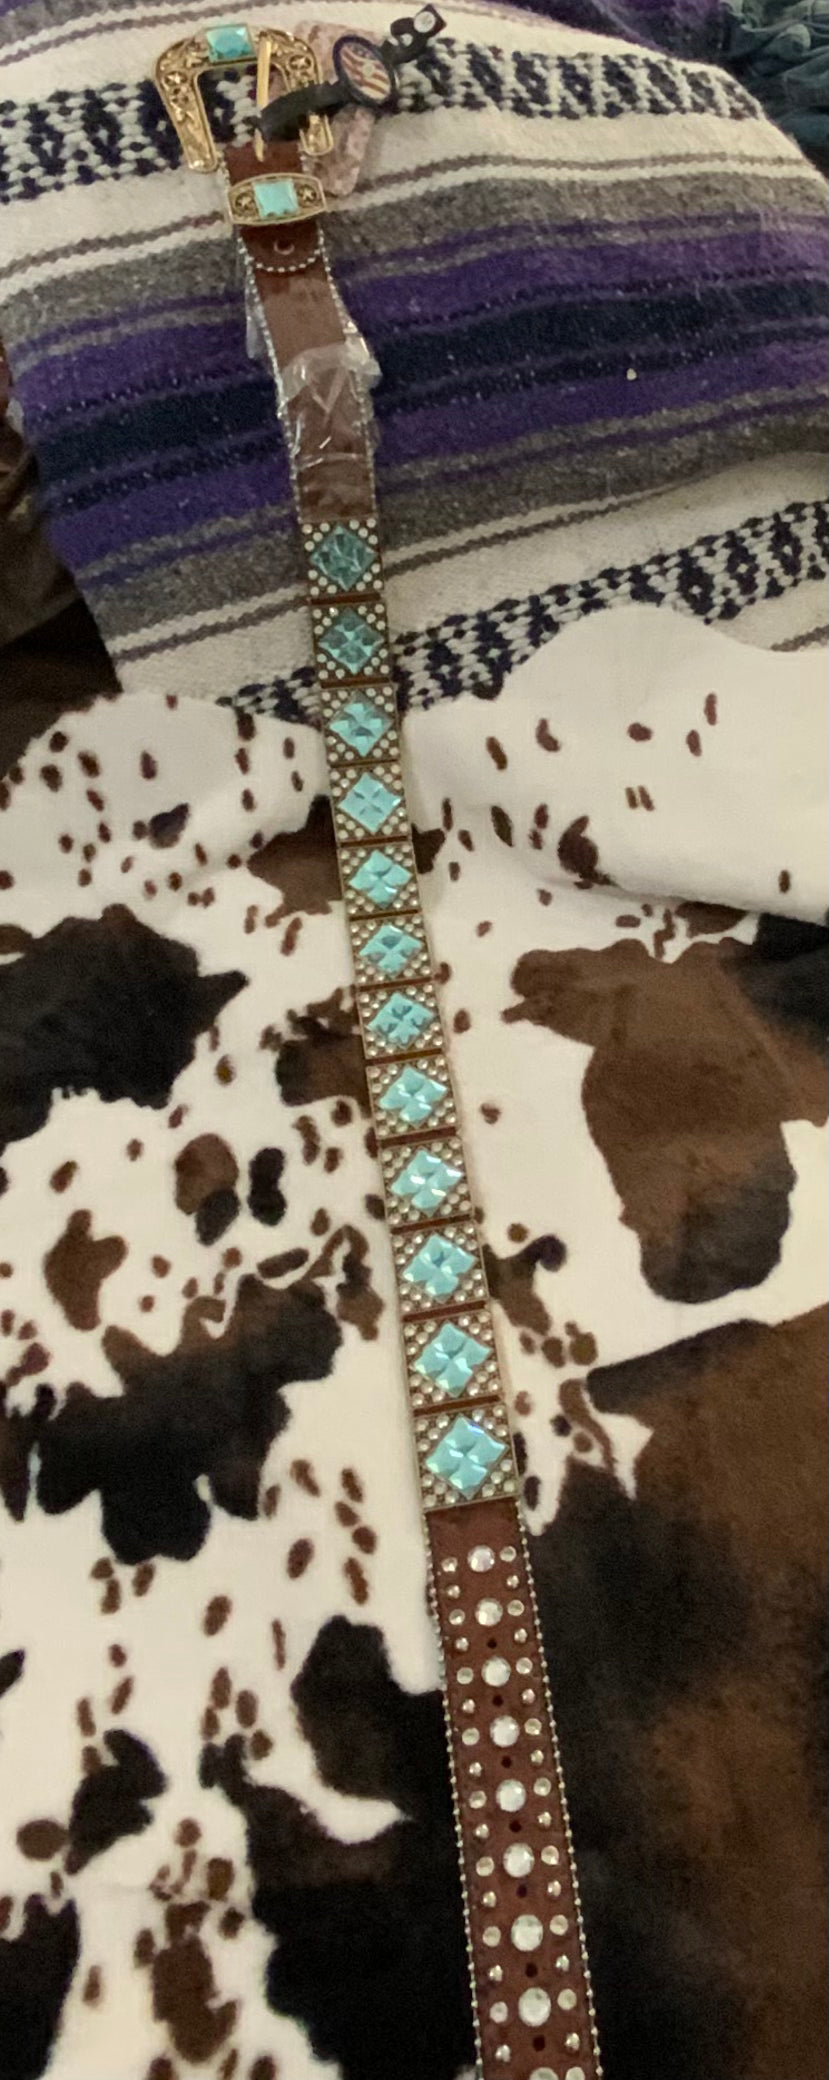 Full View-Genuine Leather Blingy Belt with Rhinestones